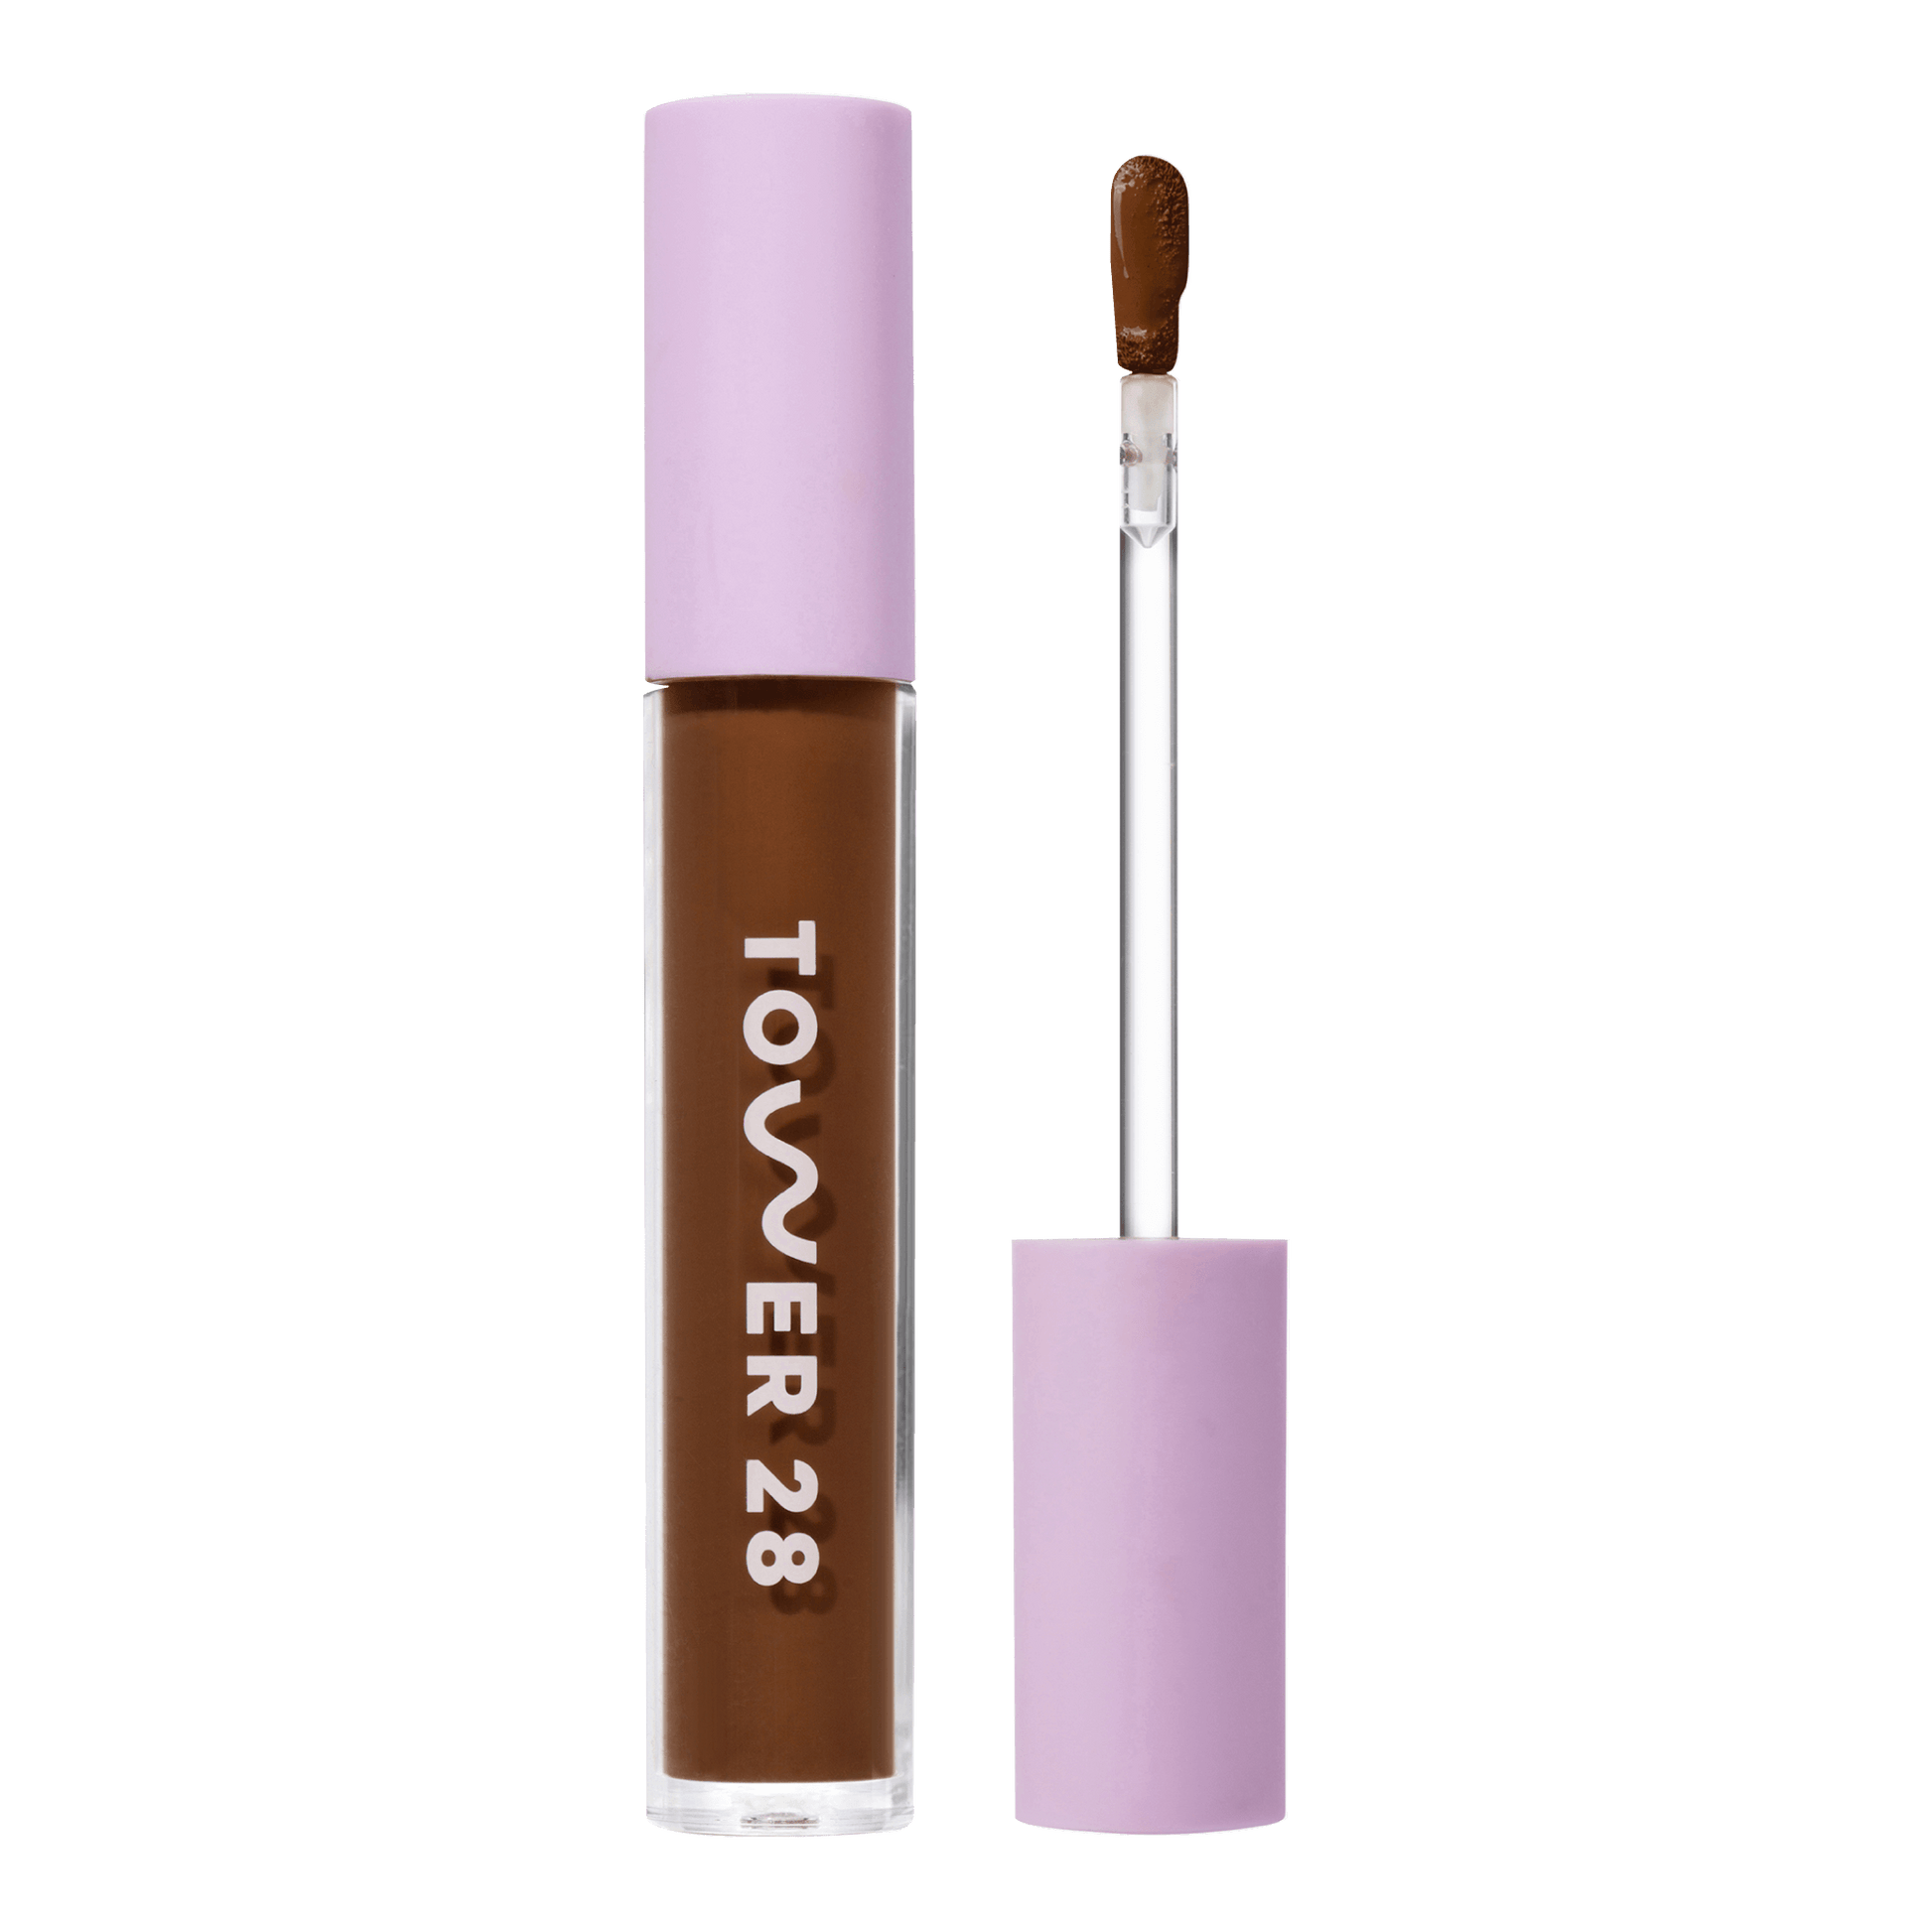 Tower 28 Beauty Swipe Serum Concealer in the shade 19.0 WEHO